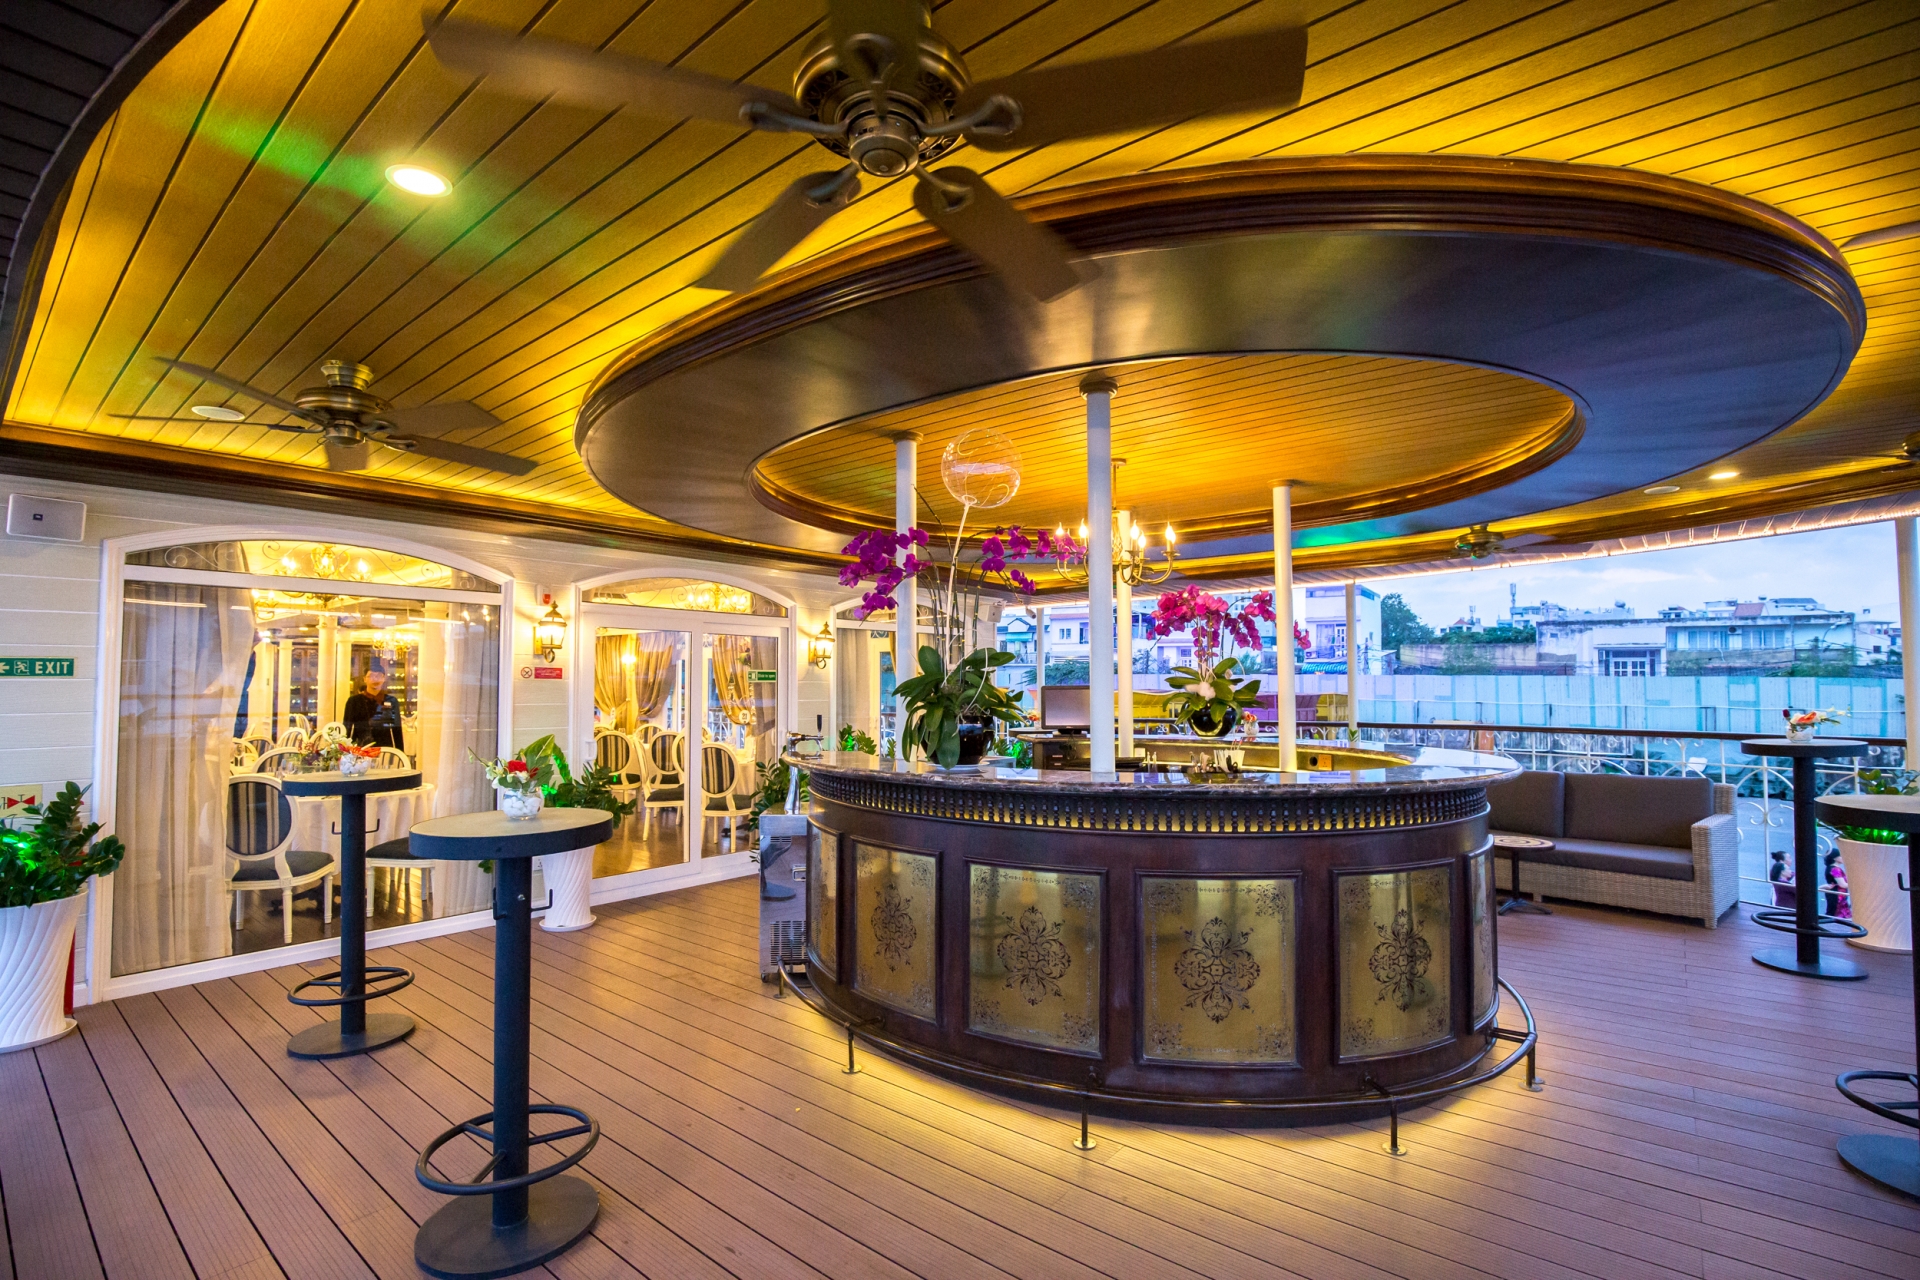 Saigon Princess offers unique fine-dining experience and cruise